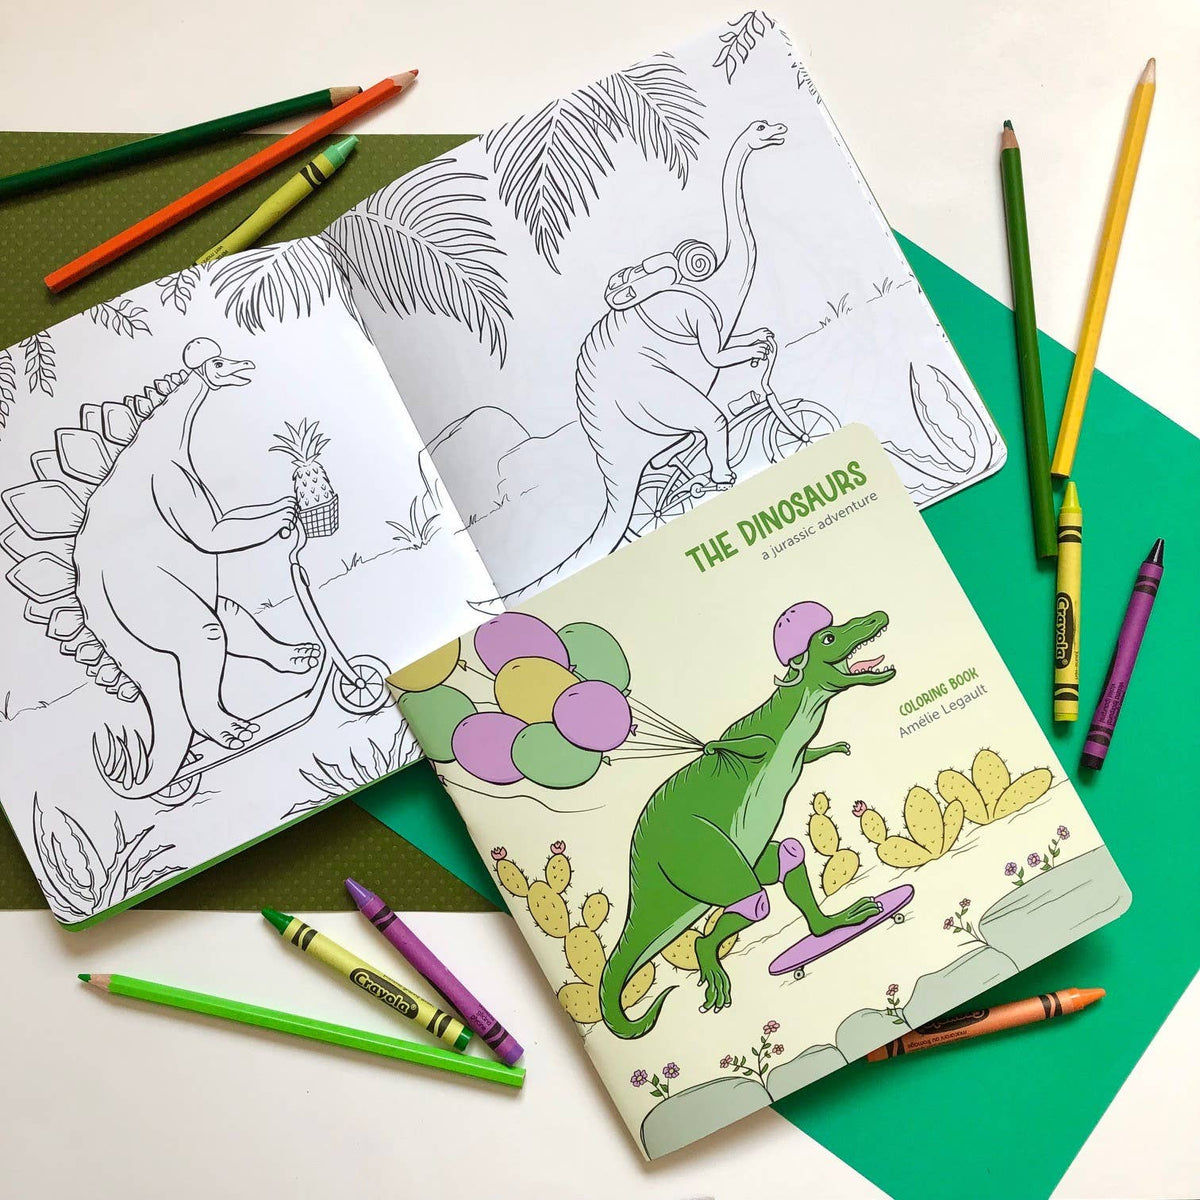 The Dinosaurs Coloring Book